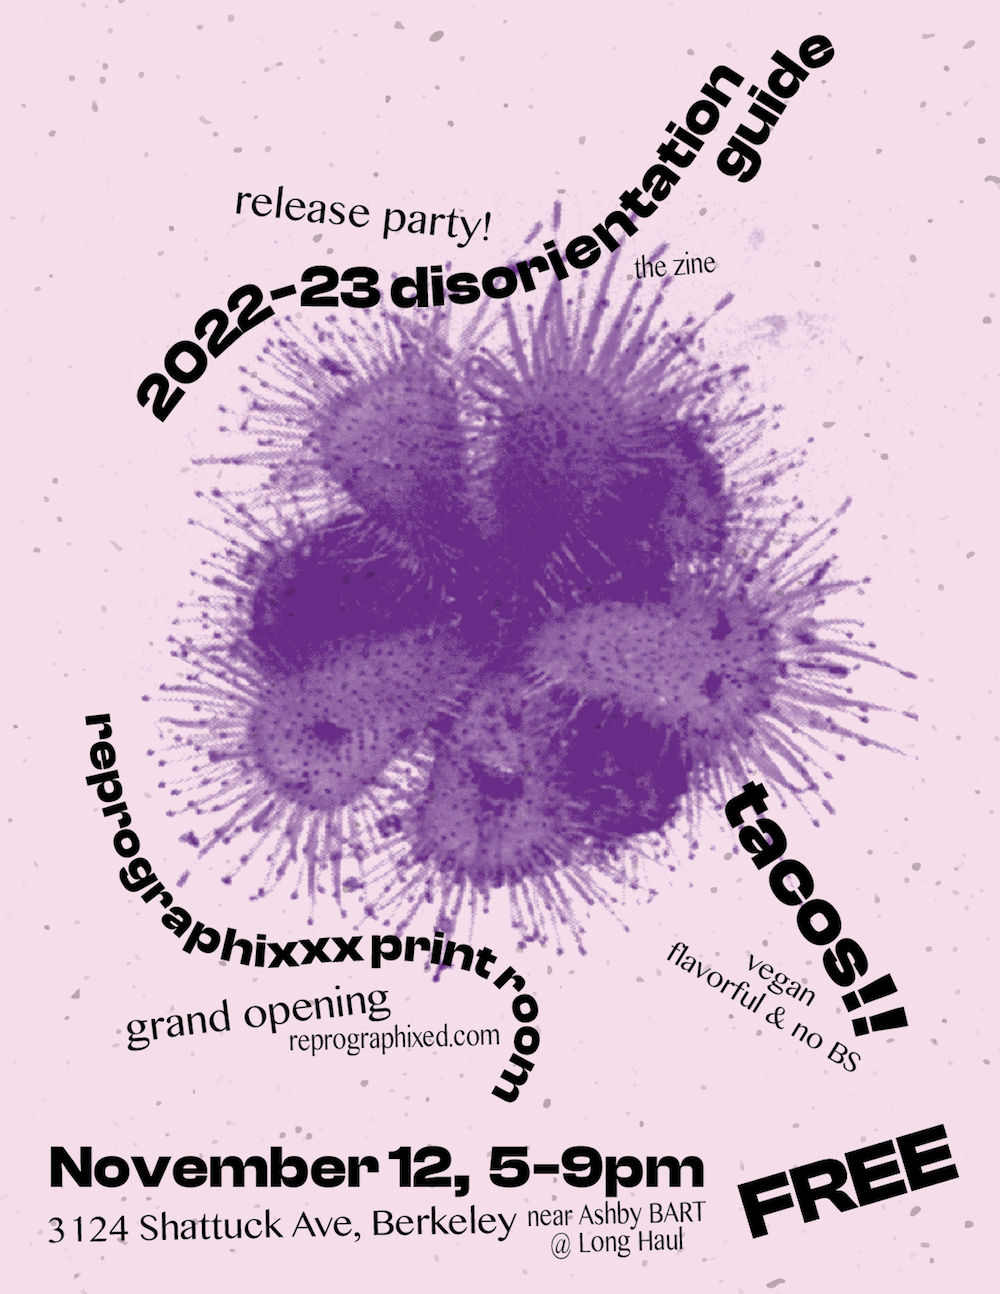 FREE Disorientation Release / Tacos / Print Room Party